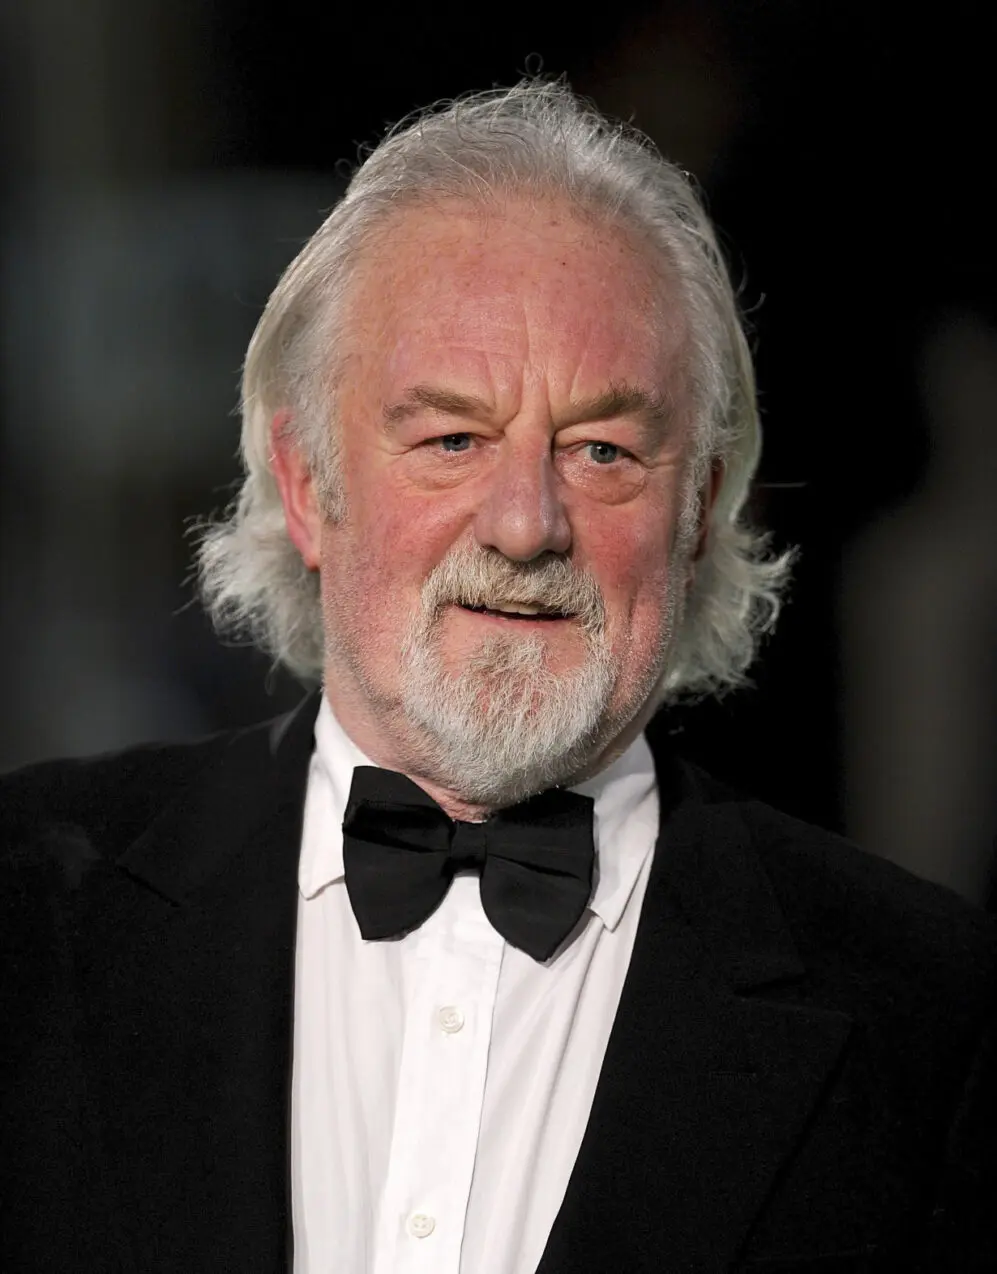 LA Post: Actor Bernard Hill, of 'Titanic' and 'Lord of the Rings,' has died at 79